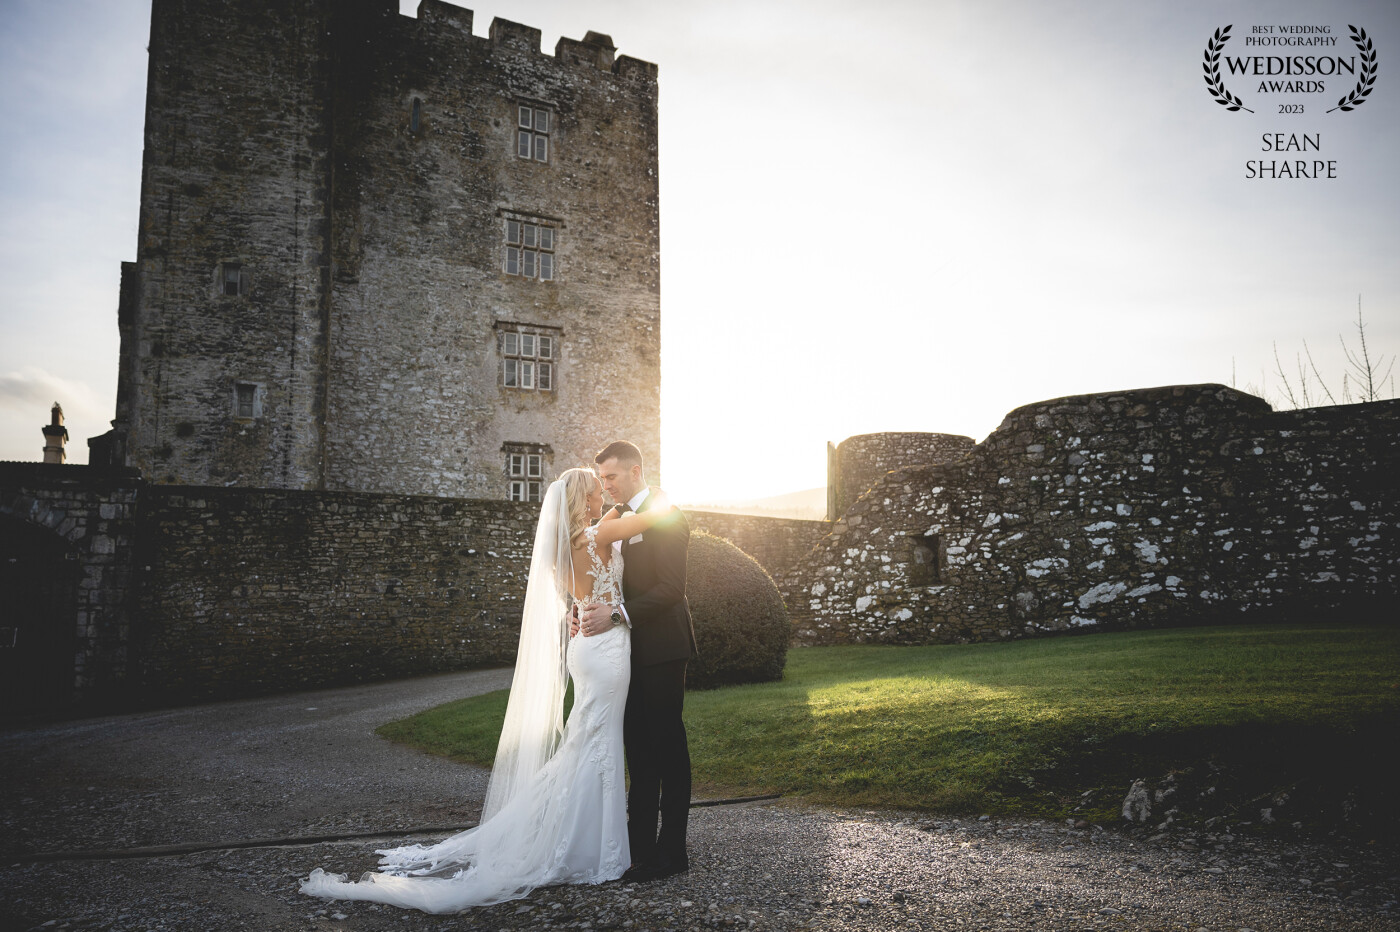 Michelle and Kieran at the beautiful Ballyhooly Castle. Such a lovely spot for photos and the light that evening was just spectacular!